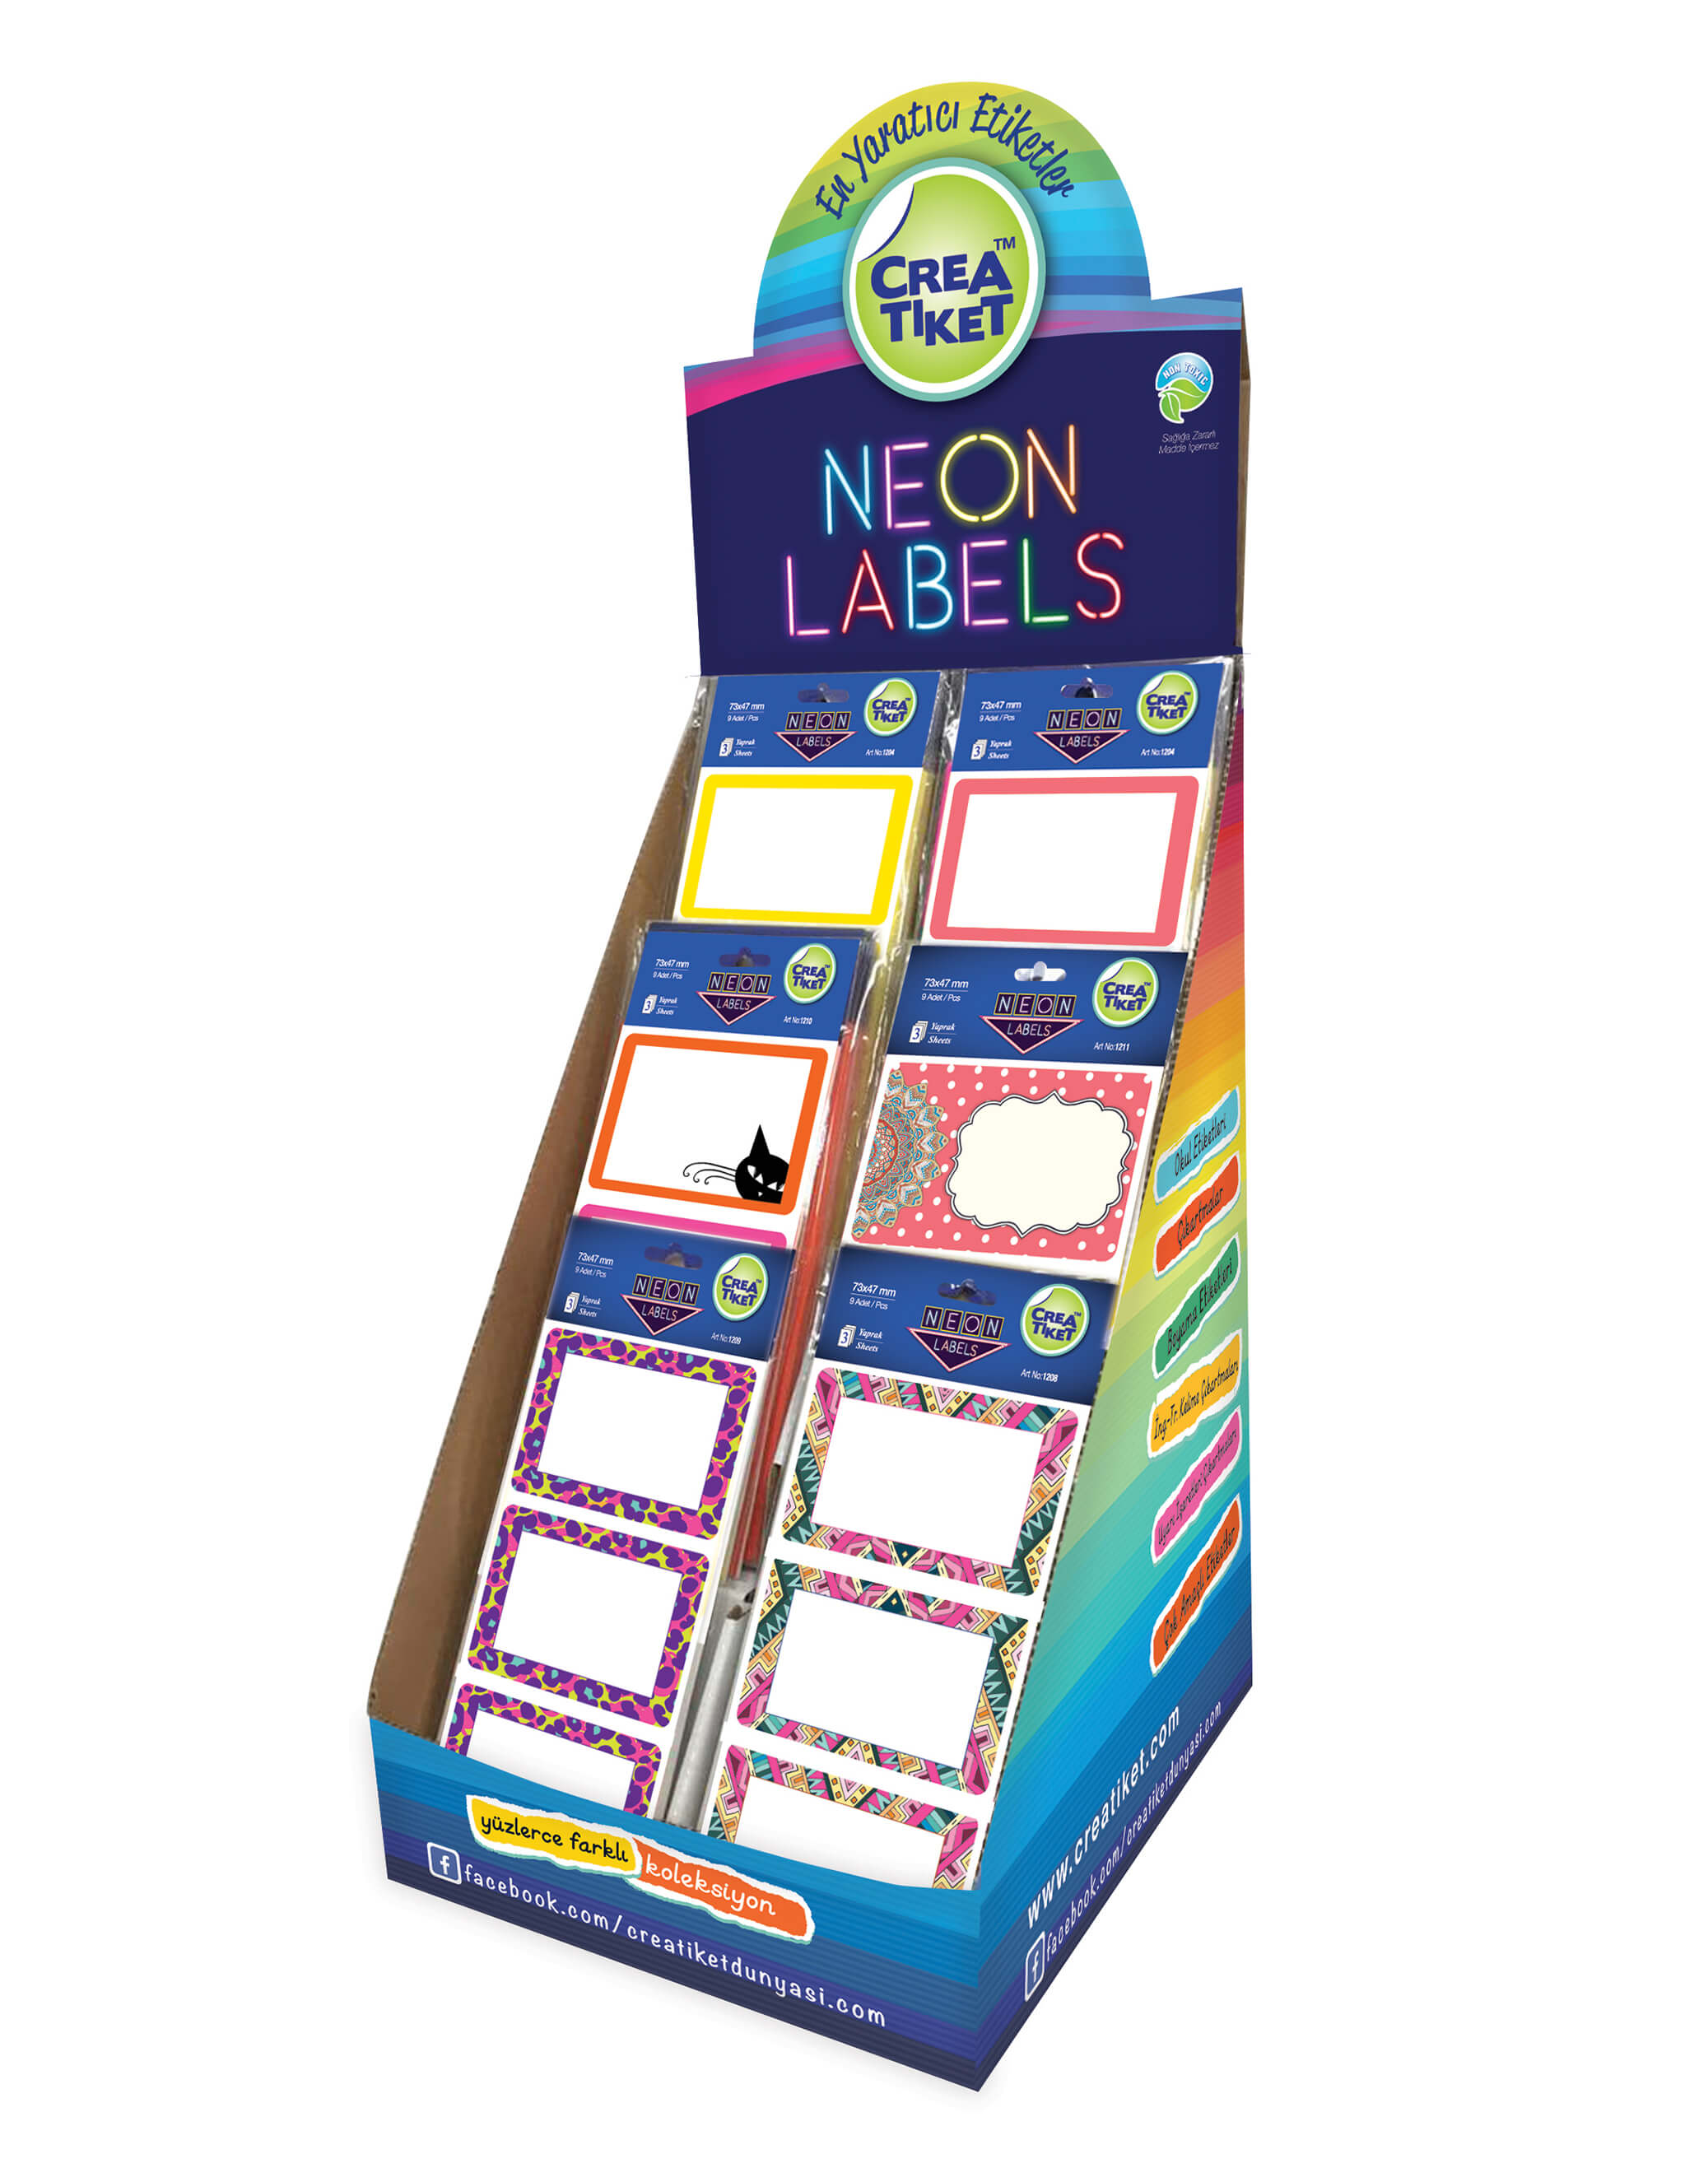 Neon Labels Cardboard Display Stand